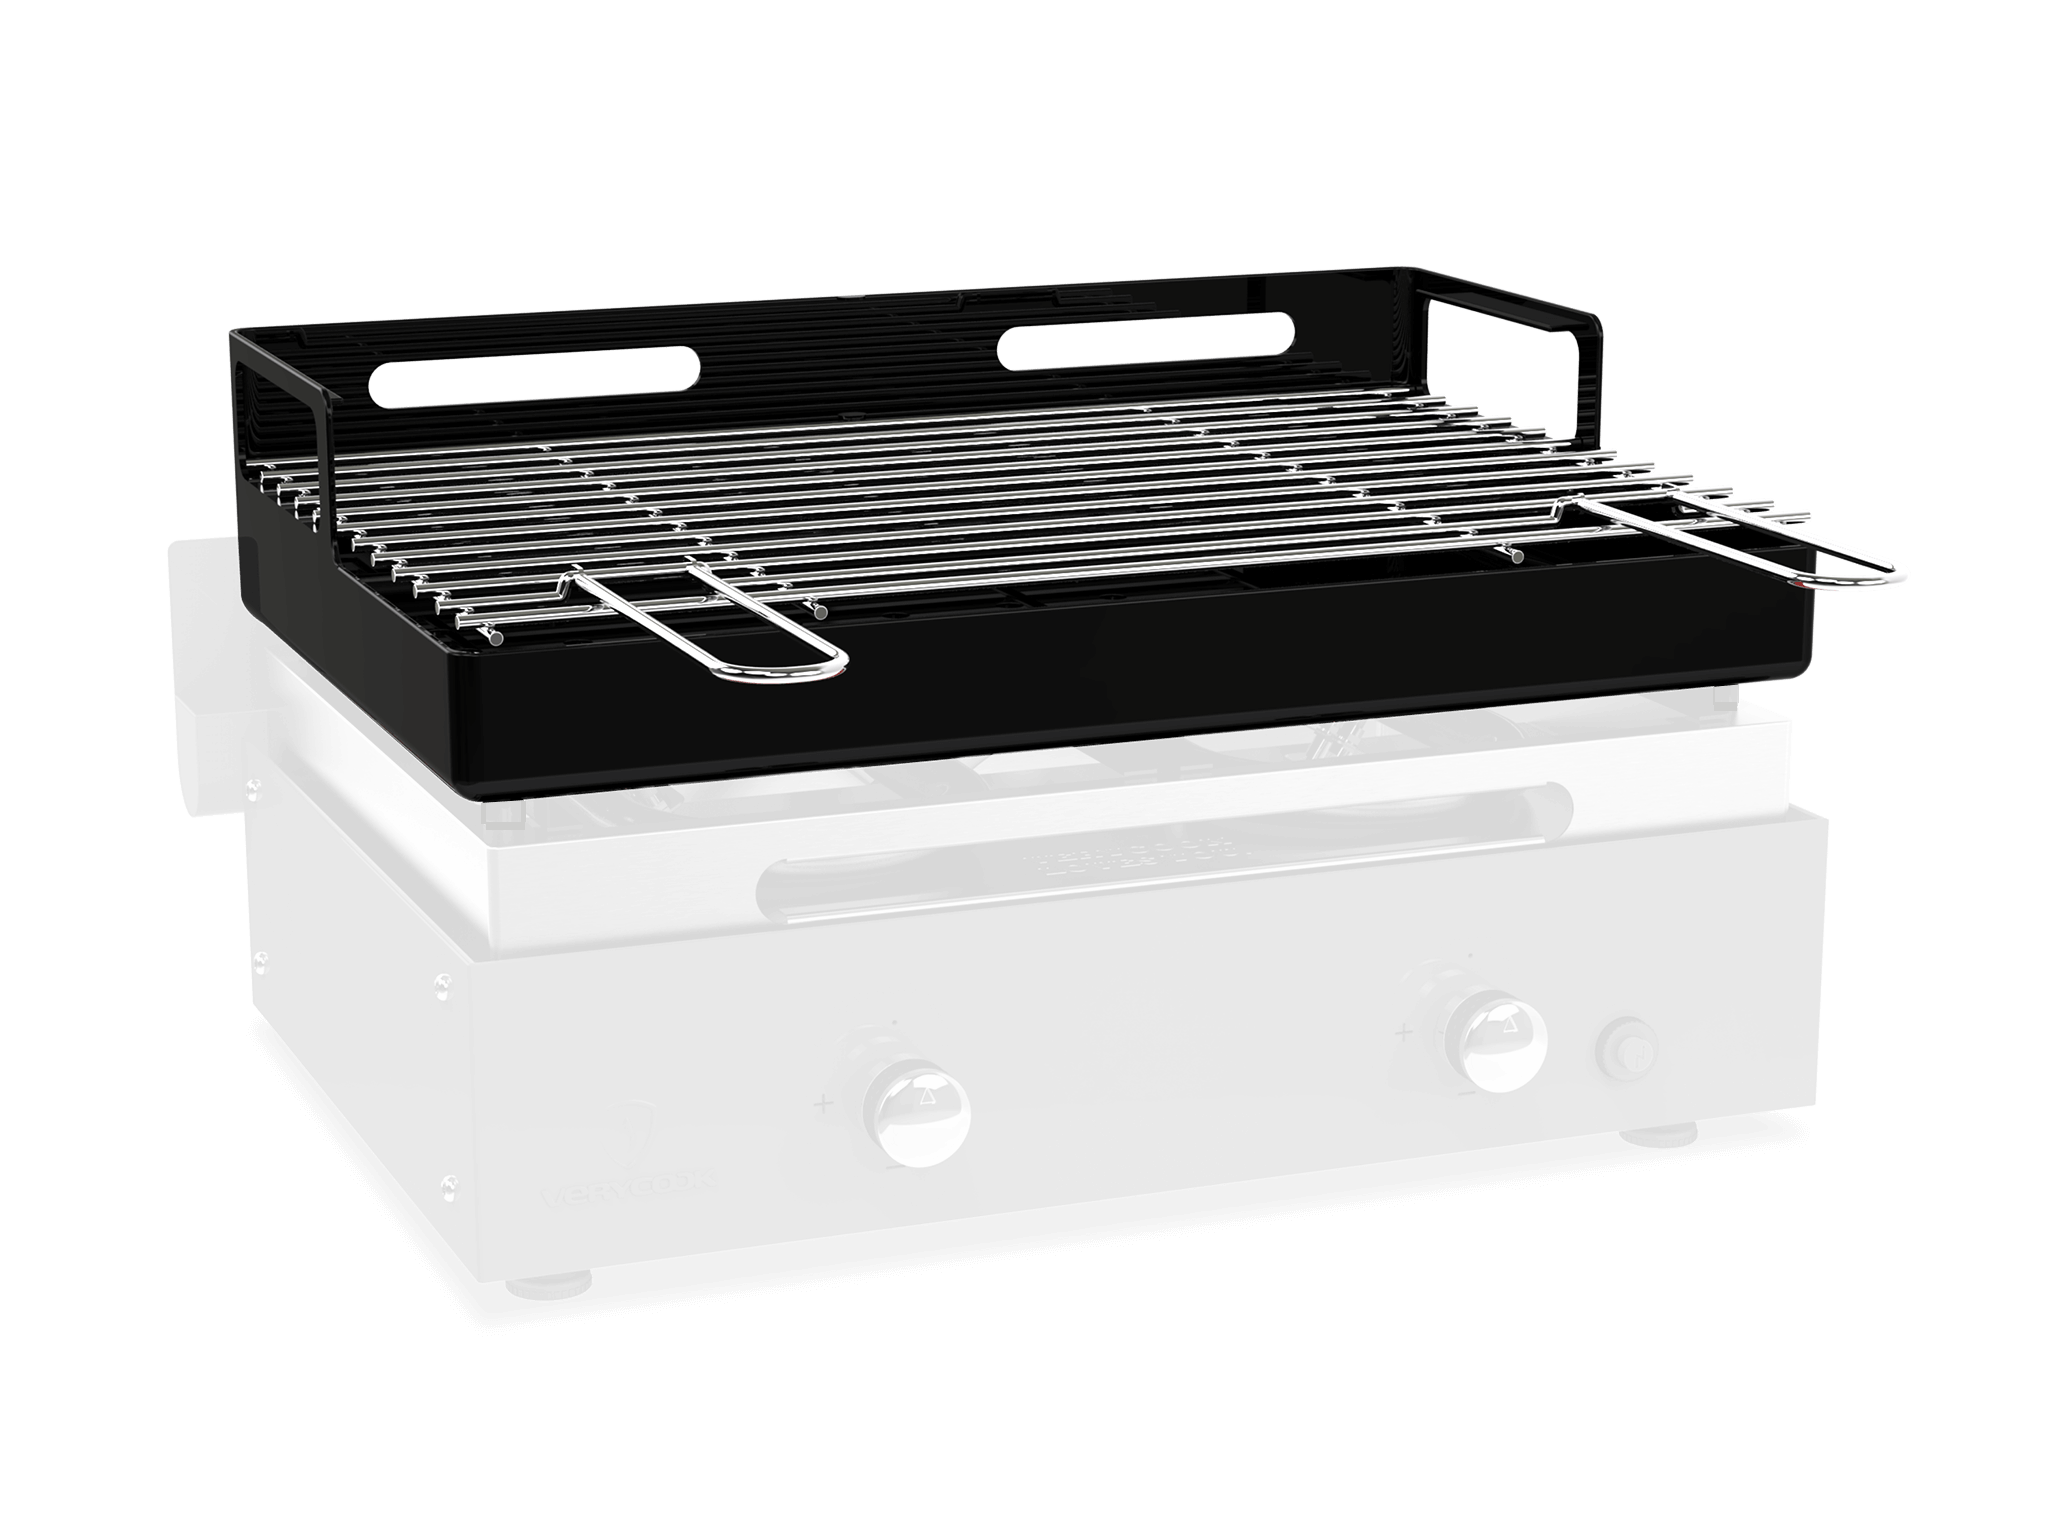 Barbecue accessoire Verygrill